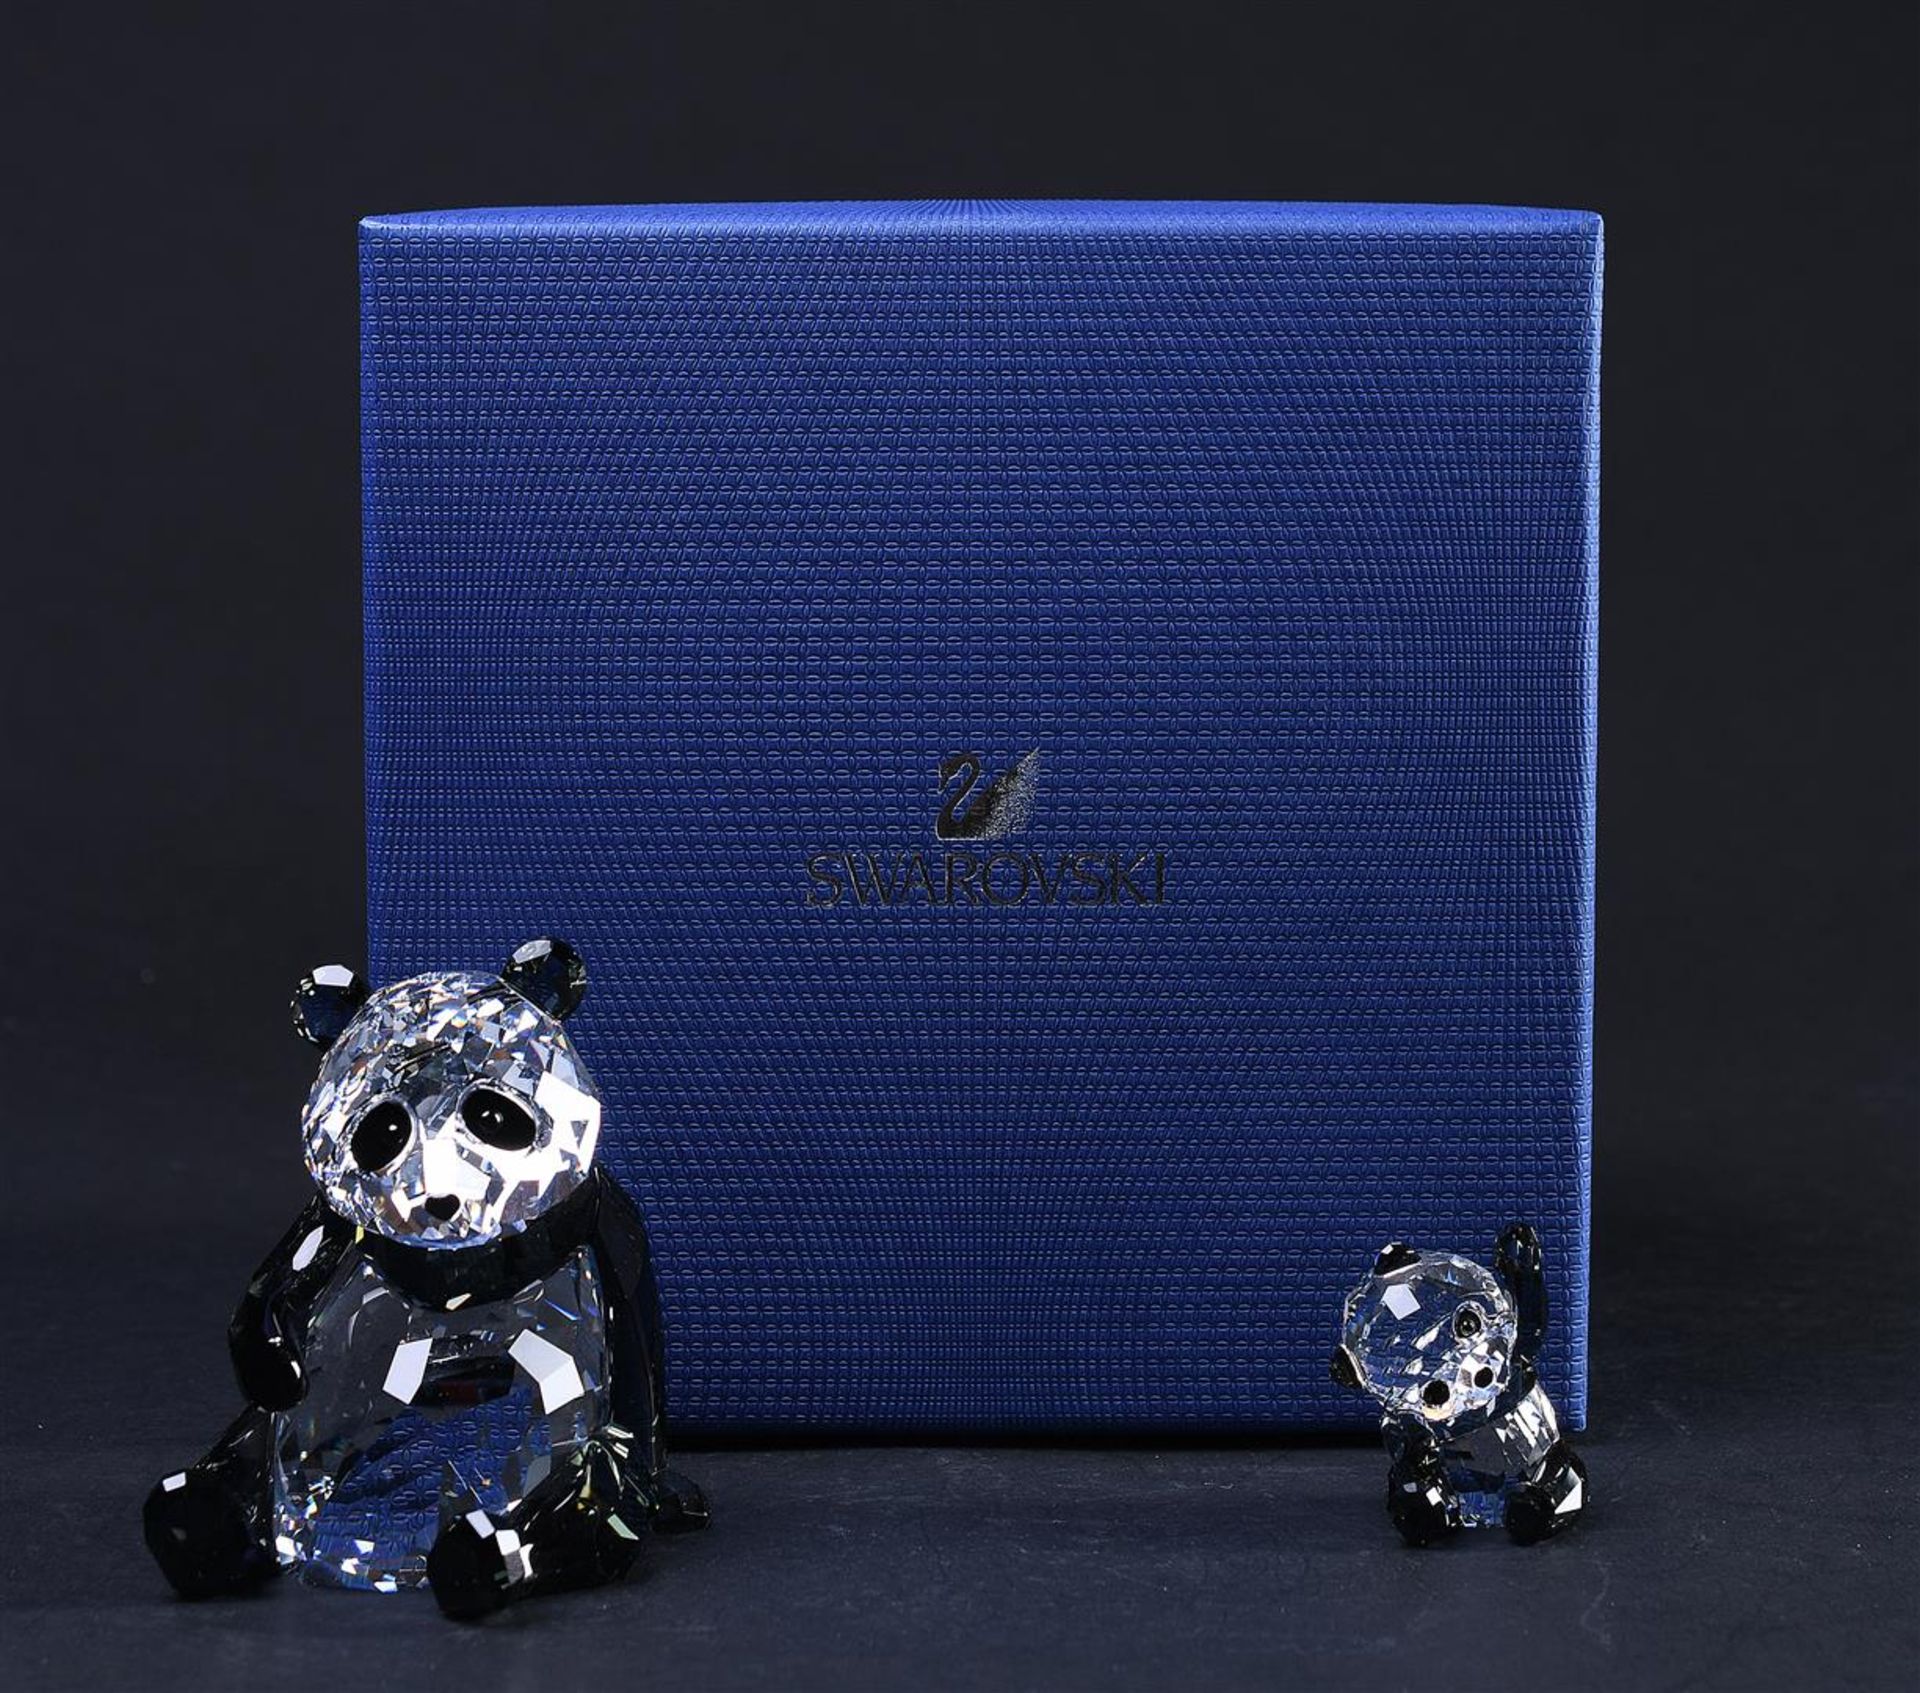 Swarovski, Panda mother with cub, year of publication 2015, design by Tord Boontje, 5063690. Include - Image 6 of 6